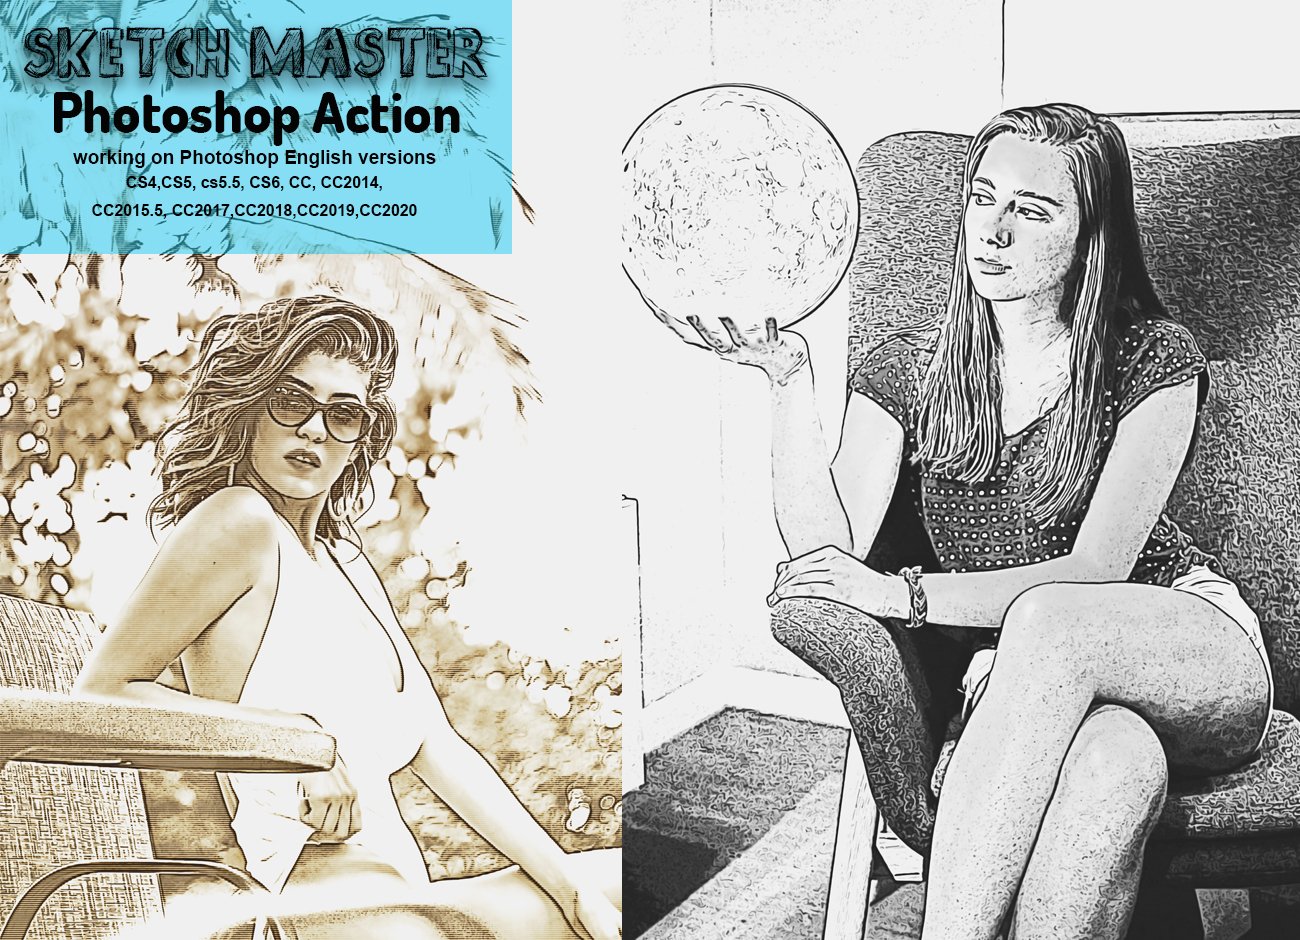 Sketch Master Photoshop Actioncover image.